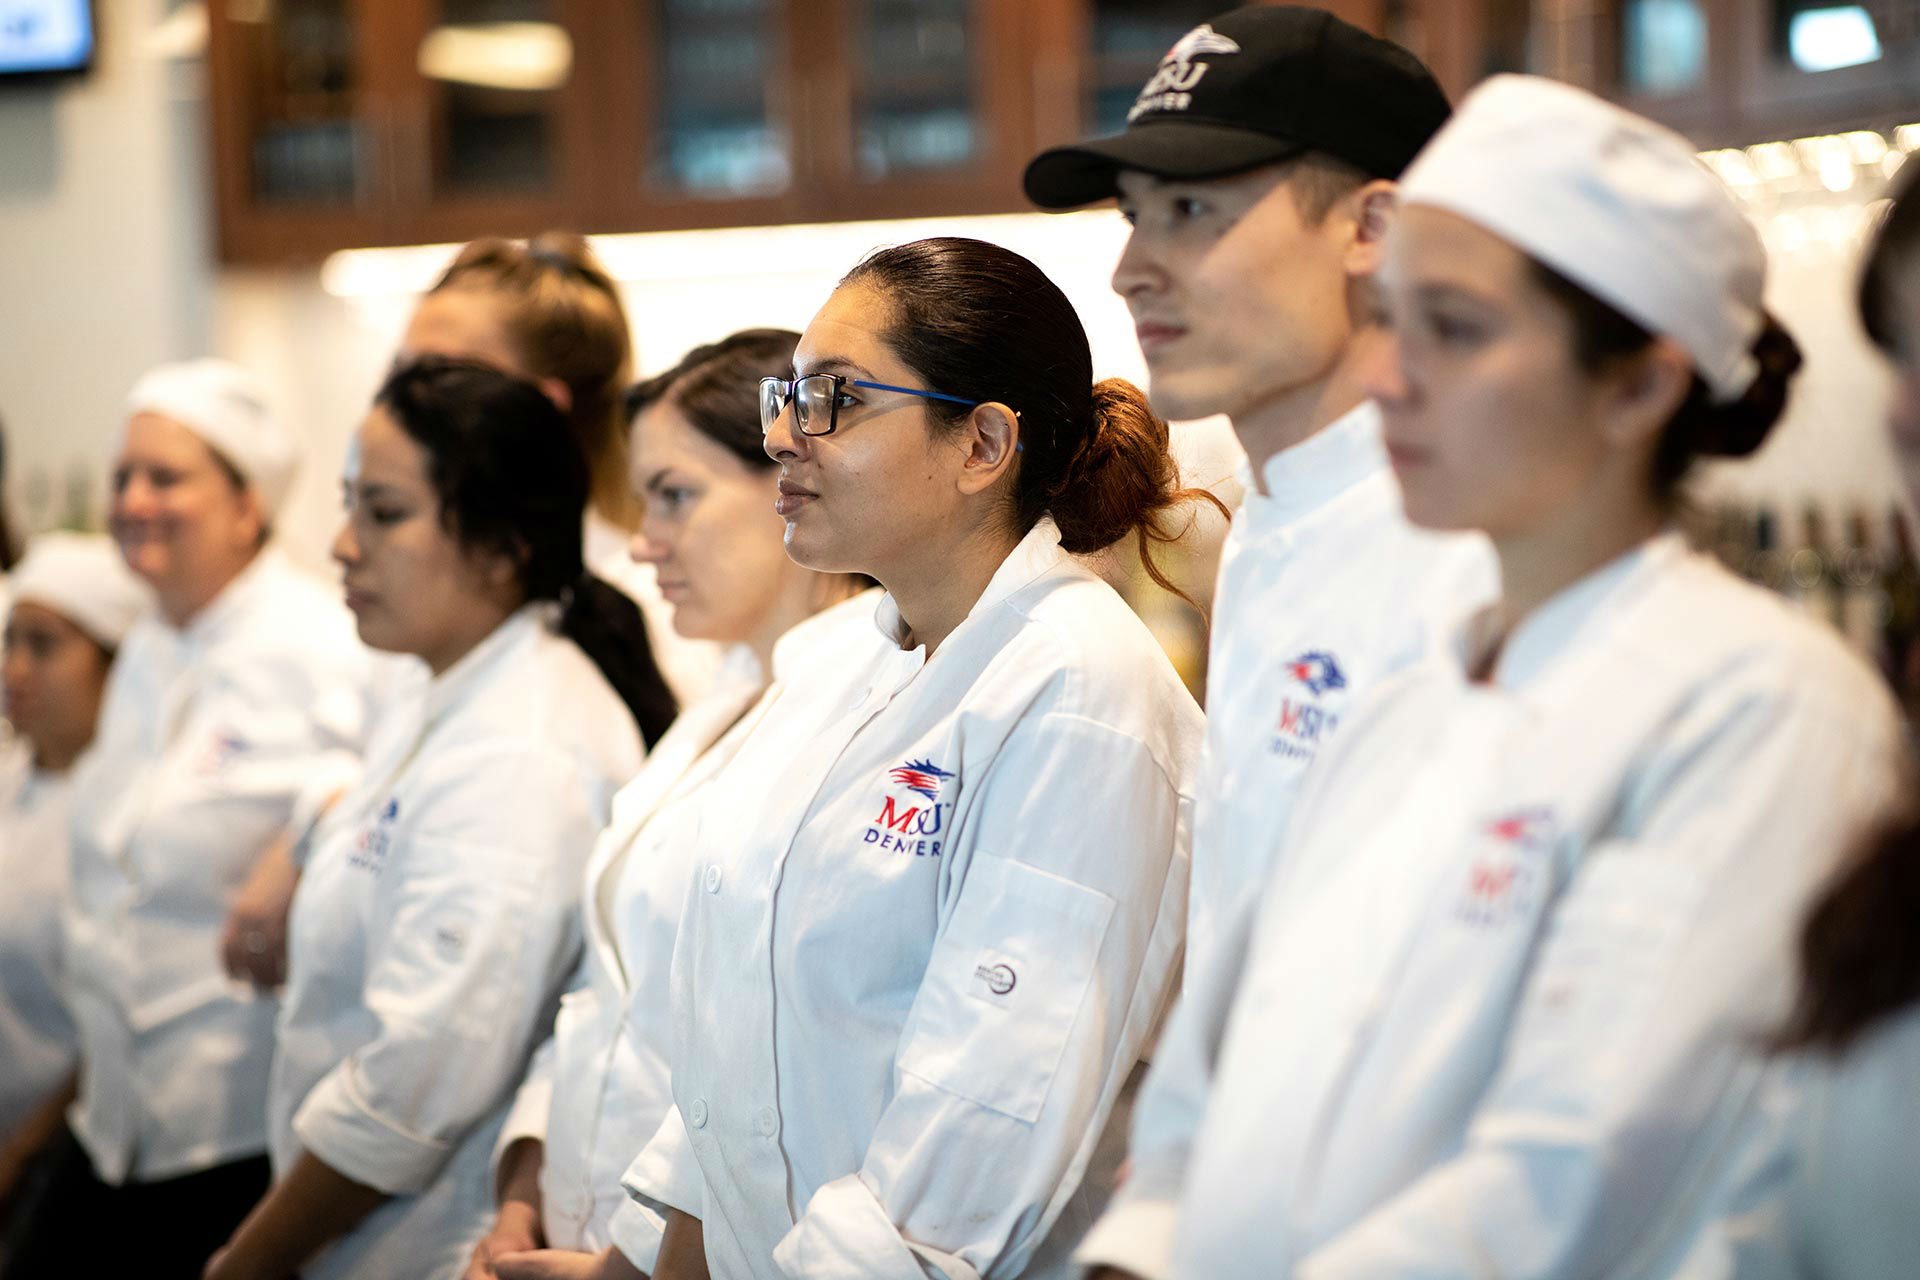 Students from MSU Denver’s school of Hospitality, Tourism and Events stand ready to serve a dining room of Denver restaurant and hospitality luminaries